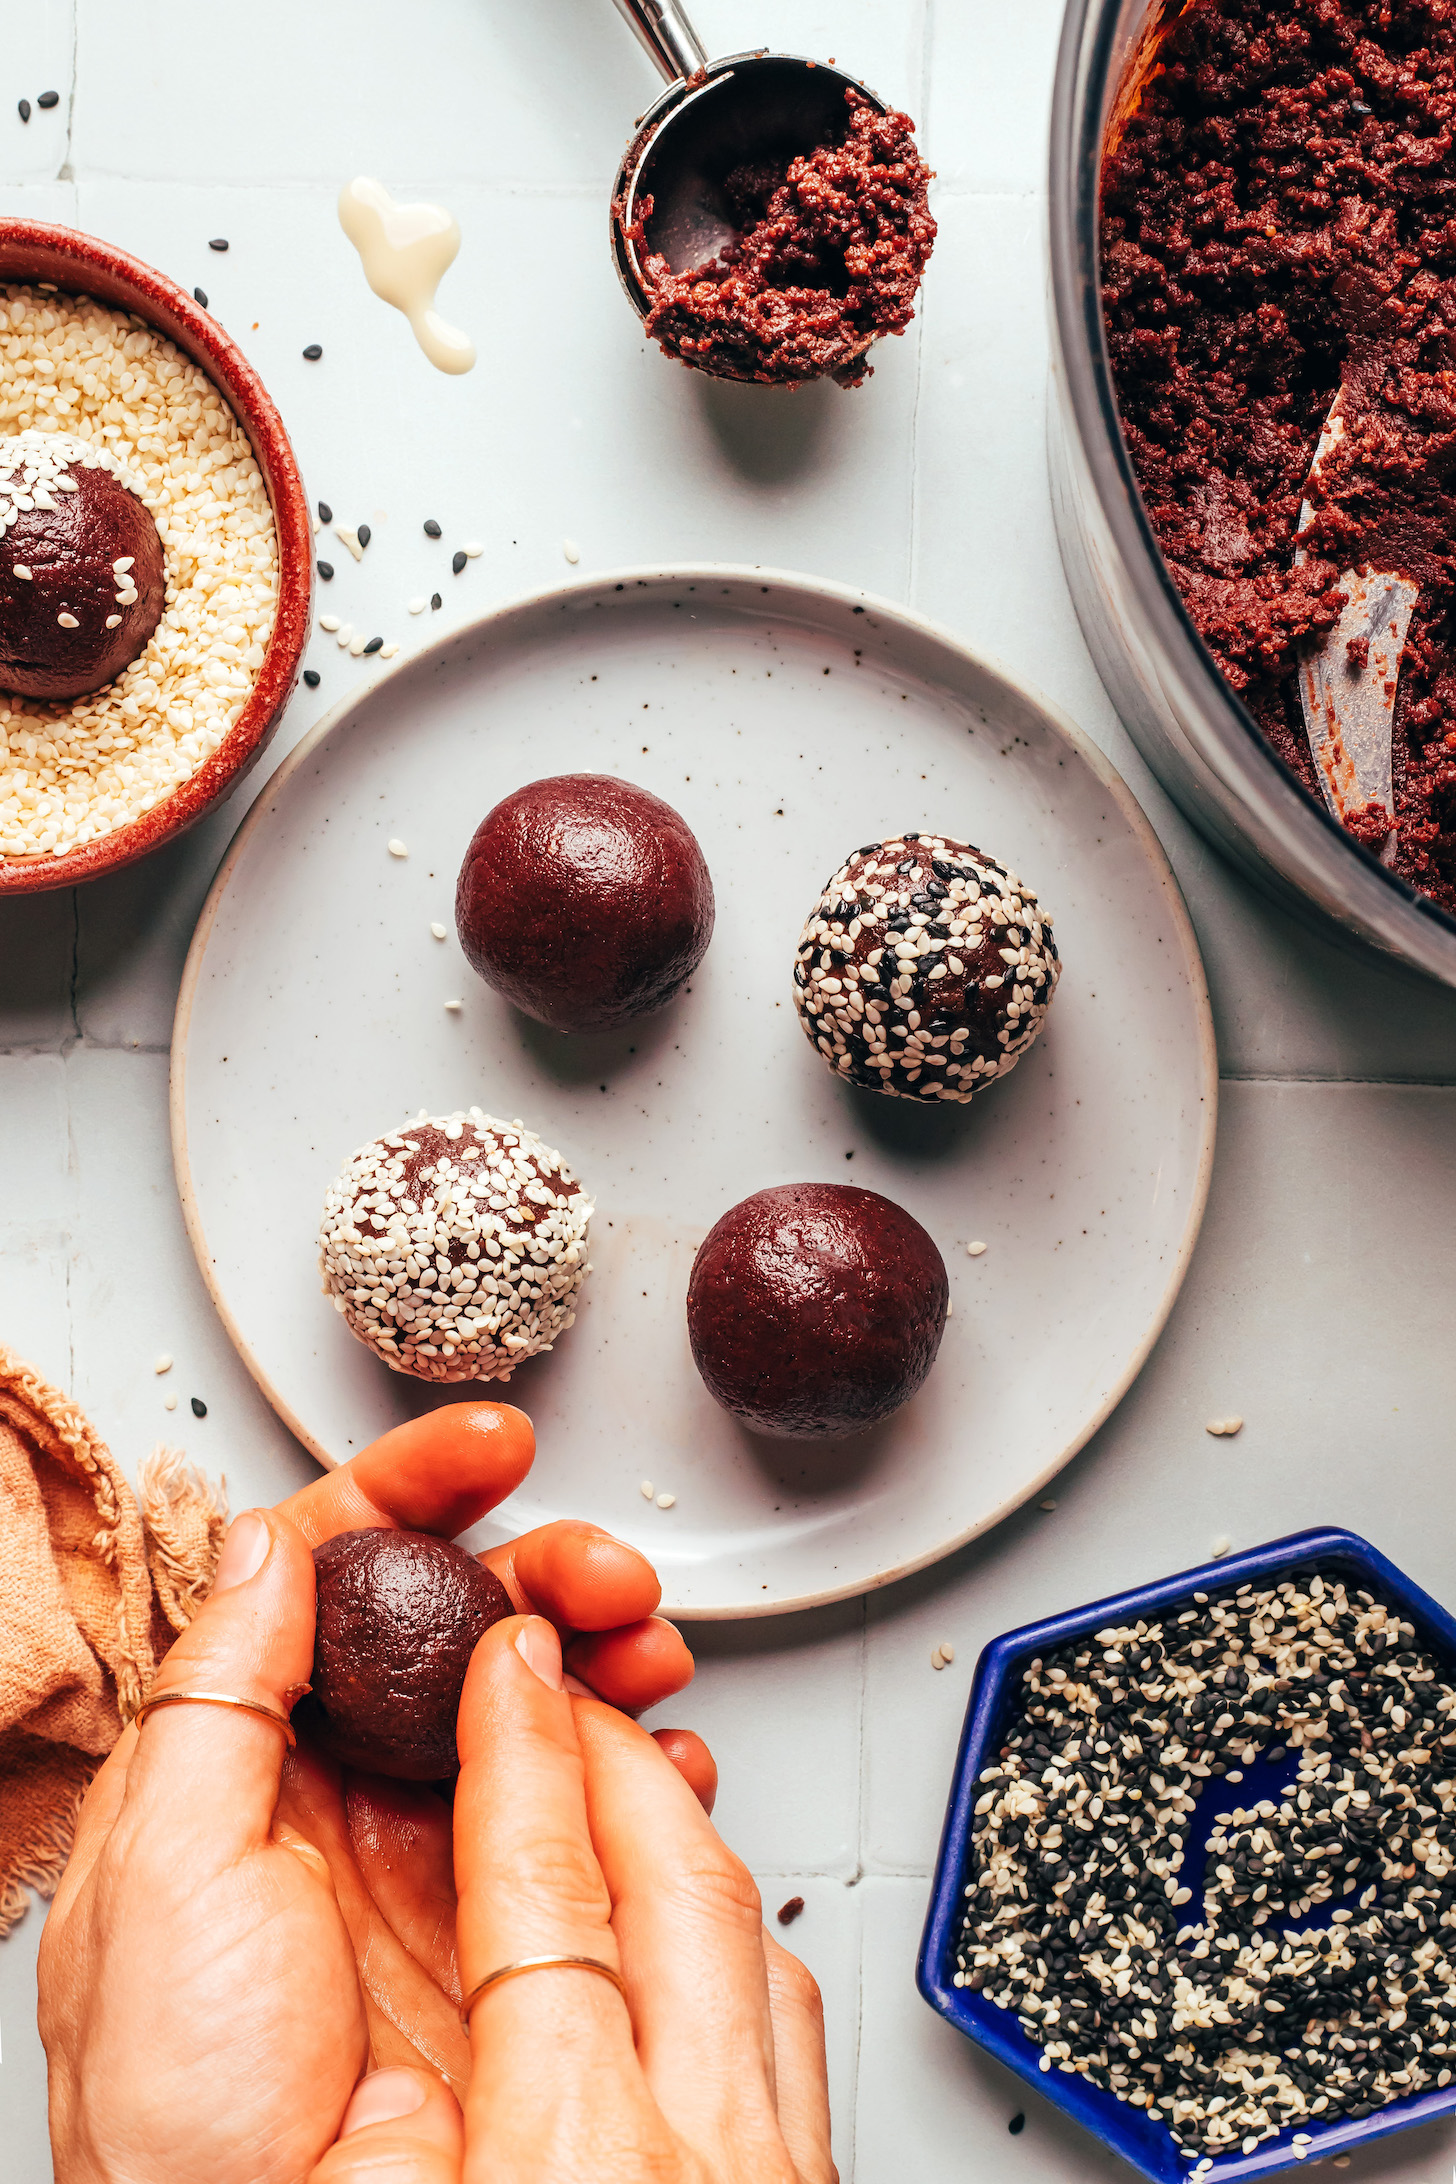 Rolling a chocolate tahini truffle next to a plate with more truffles